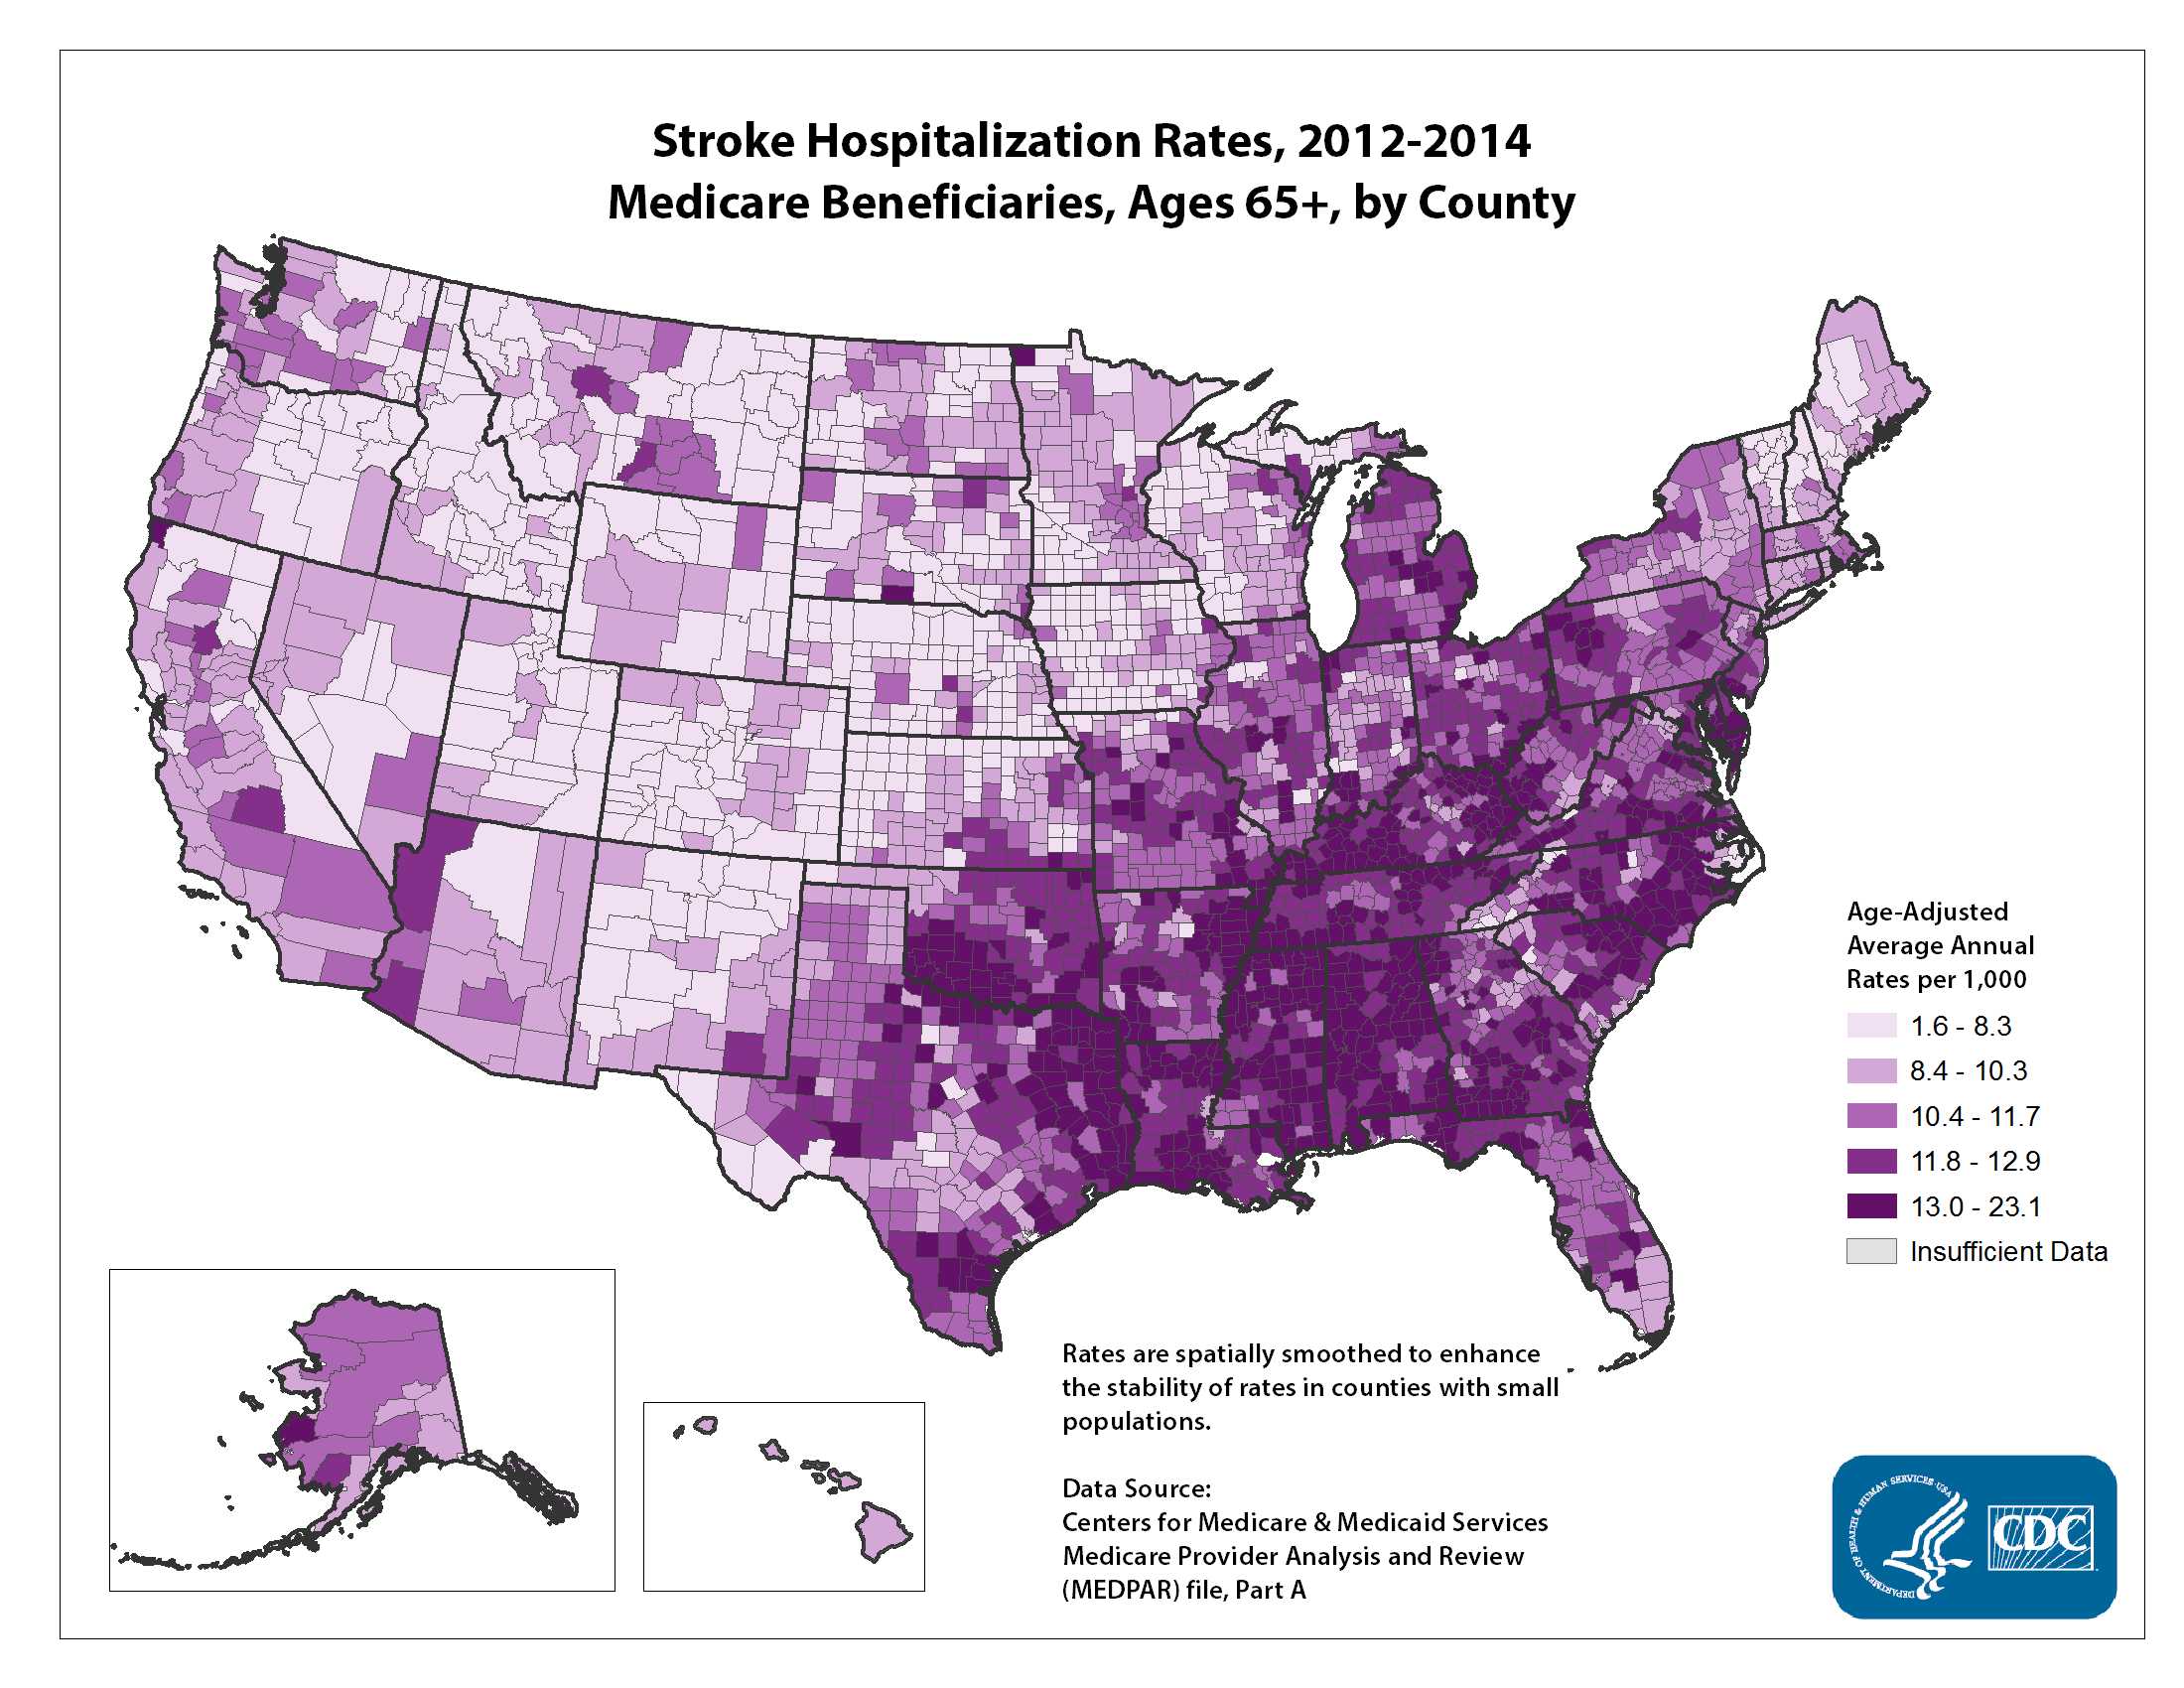 Stroke Hospitalization Rates for 2010 through 2012 for Adults Aged 65 Years and Older by County. The map shows that concentrations of counties with the highest stroke hospitalization rates - meaning the top quintile - are located primarily in the Southeast, with heavy concentrations of high-rate counties in Alabama, Mississippi, and Louisiana. Pockets of high-rate counties also are found in West Virginia, Kentucky, Tennessee, Arkansas, Oklahoma, Florida, Virginia, parts of Texas, and along the coastal plains of North Carolina, South Carolina, and Georgia.